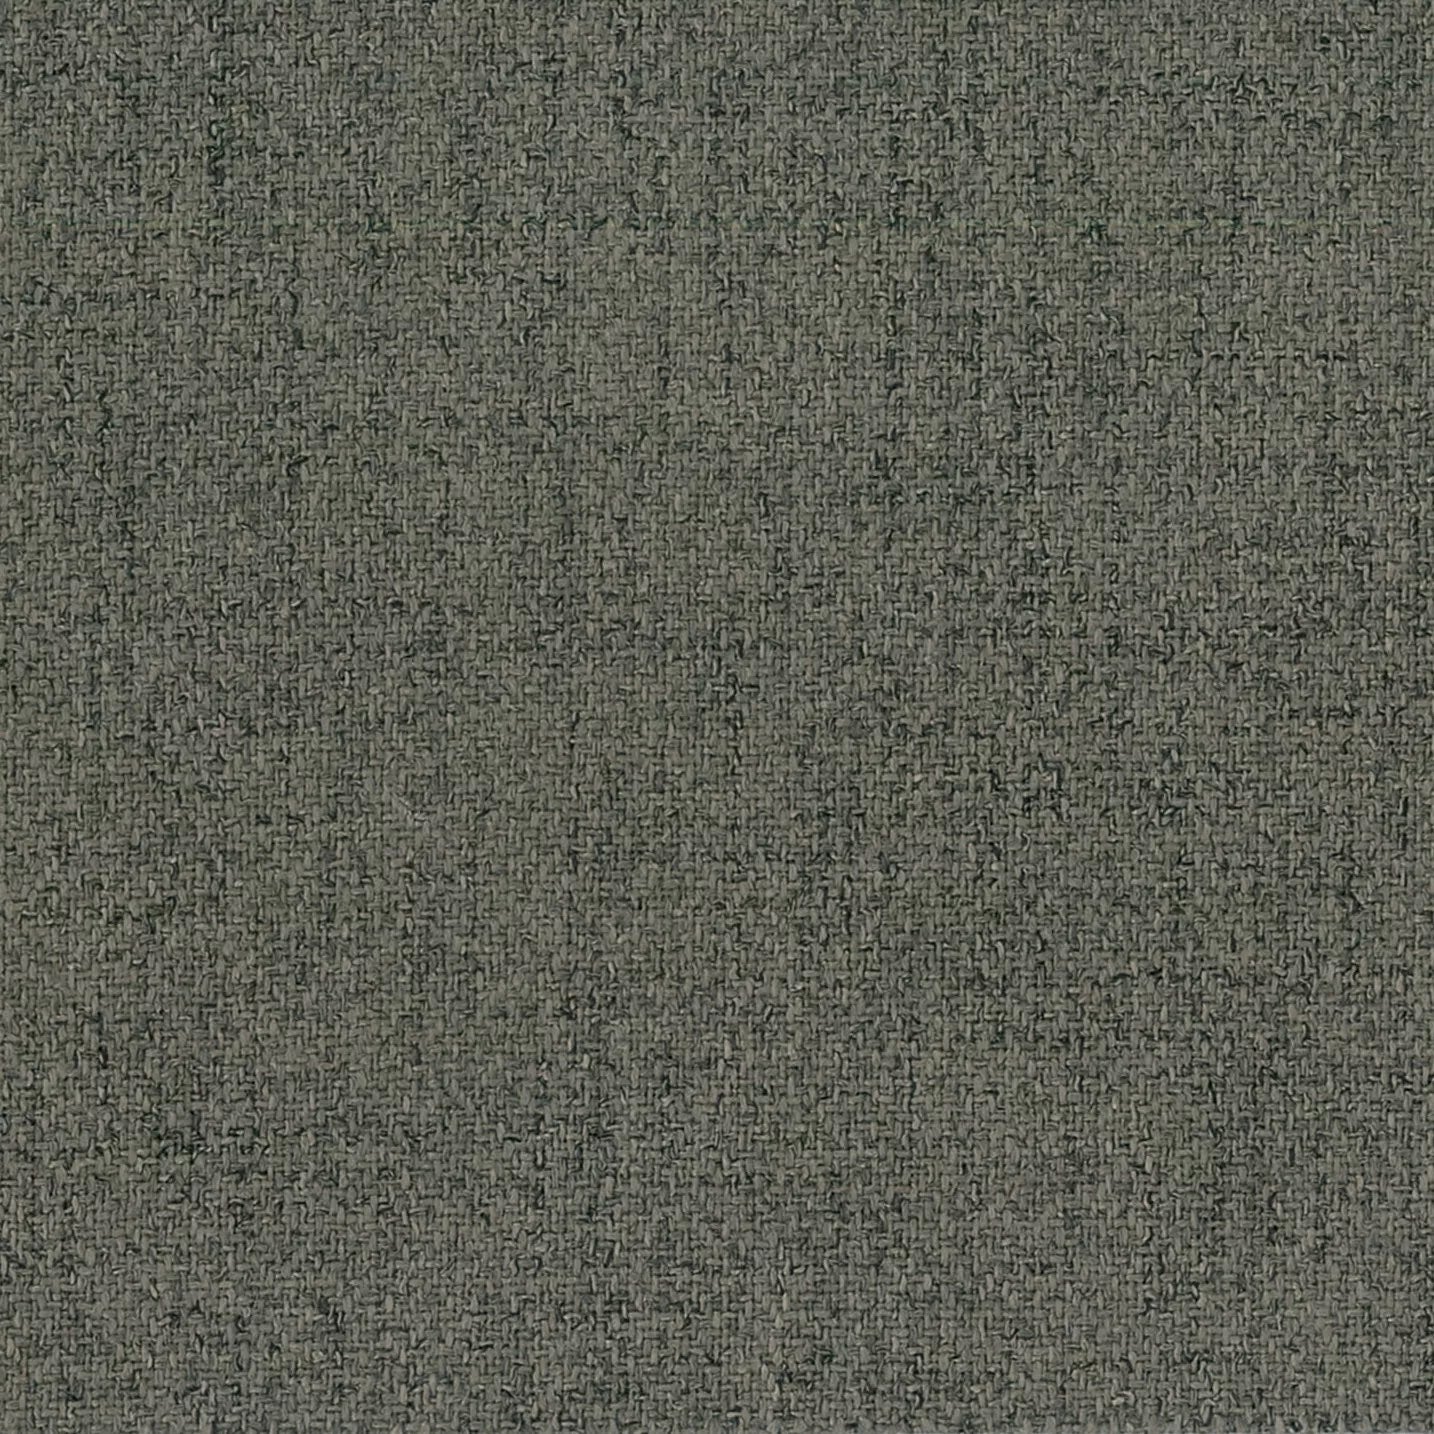 HAWTHORN MINK FABRIC SAMPLE | VALUE COLLECTION